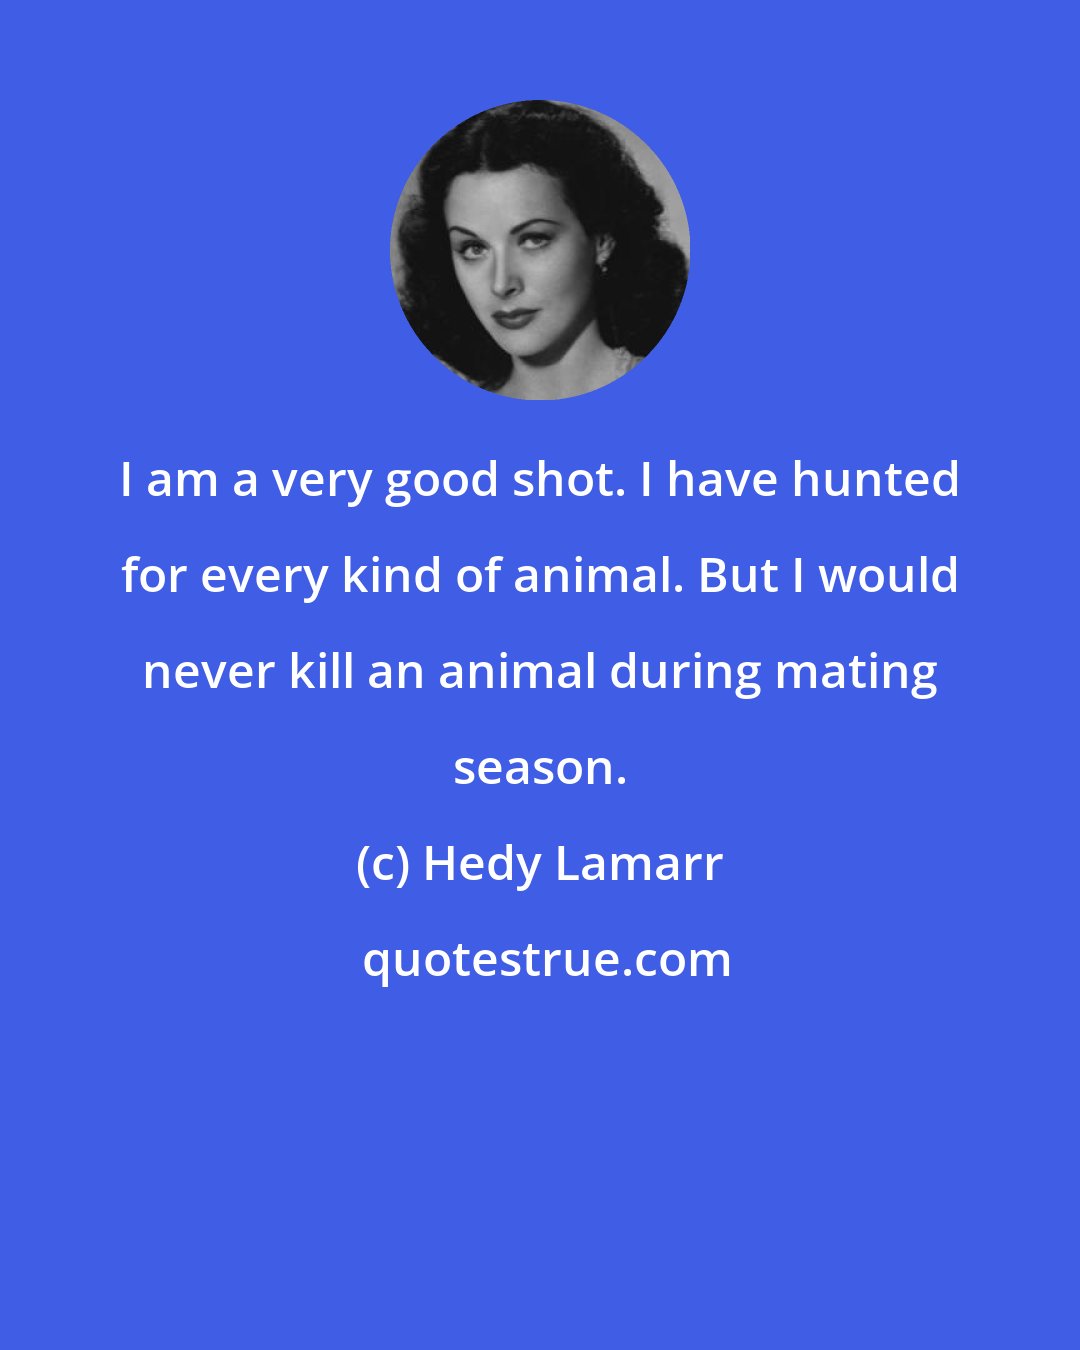 Hedy Lamarr: I am a very good shot. I have hunted for every kind of animal. But I would never kill an animal during mating season.